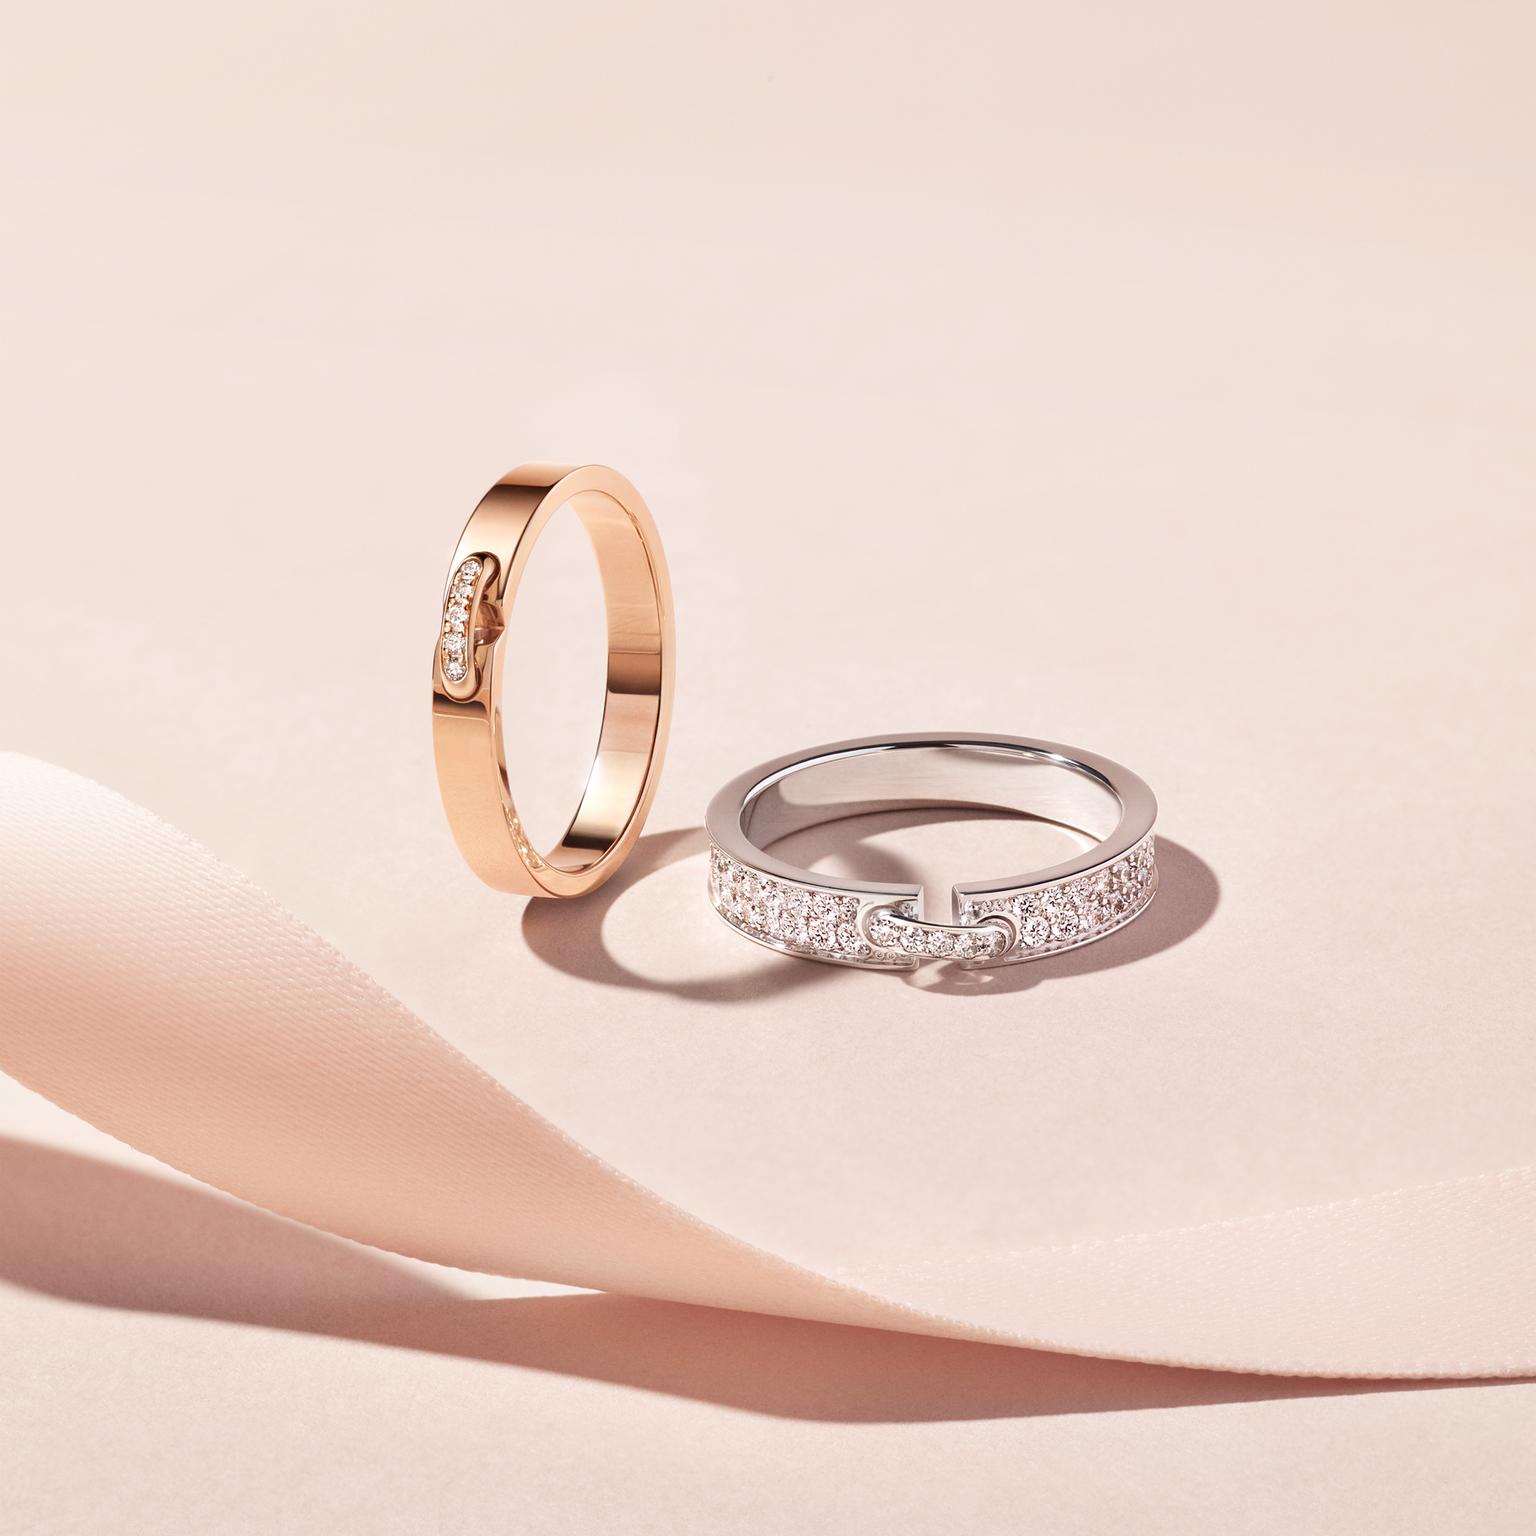 Chaumet Liens Evidence wedding bands